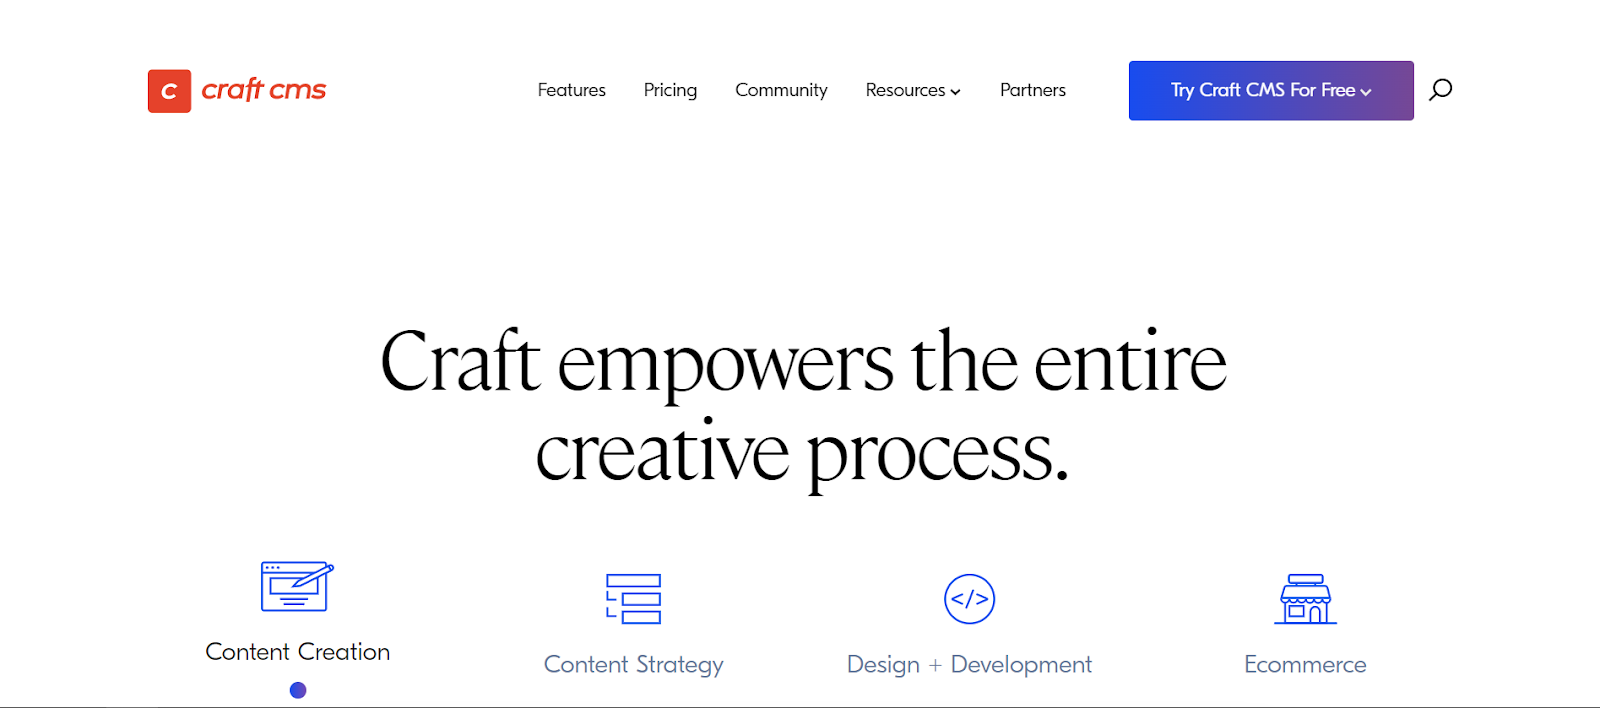 What is Craft CMS